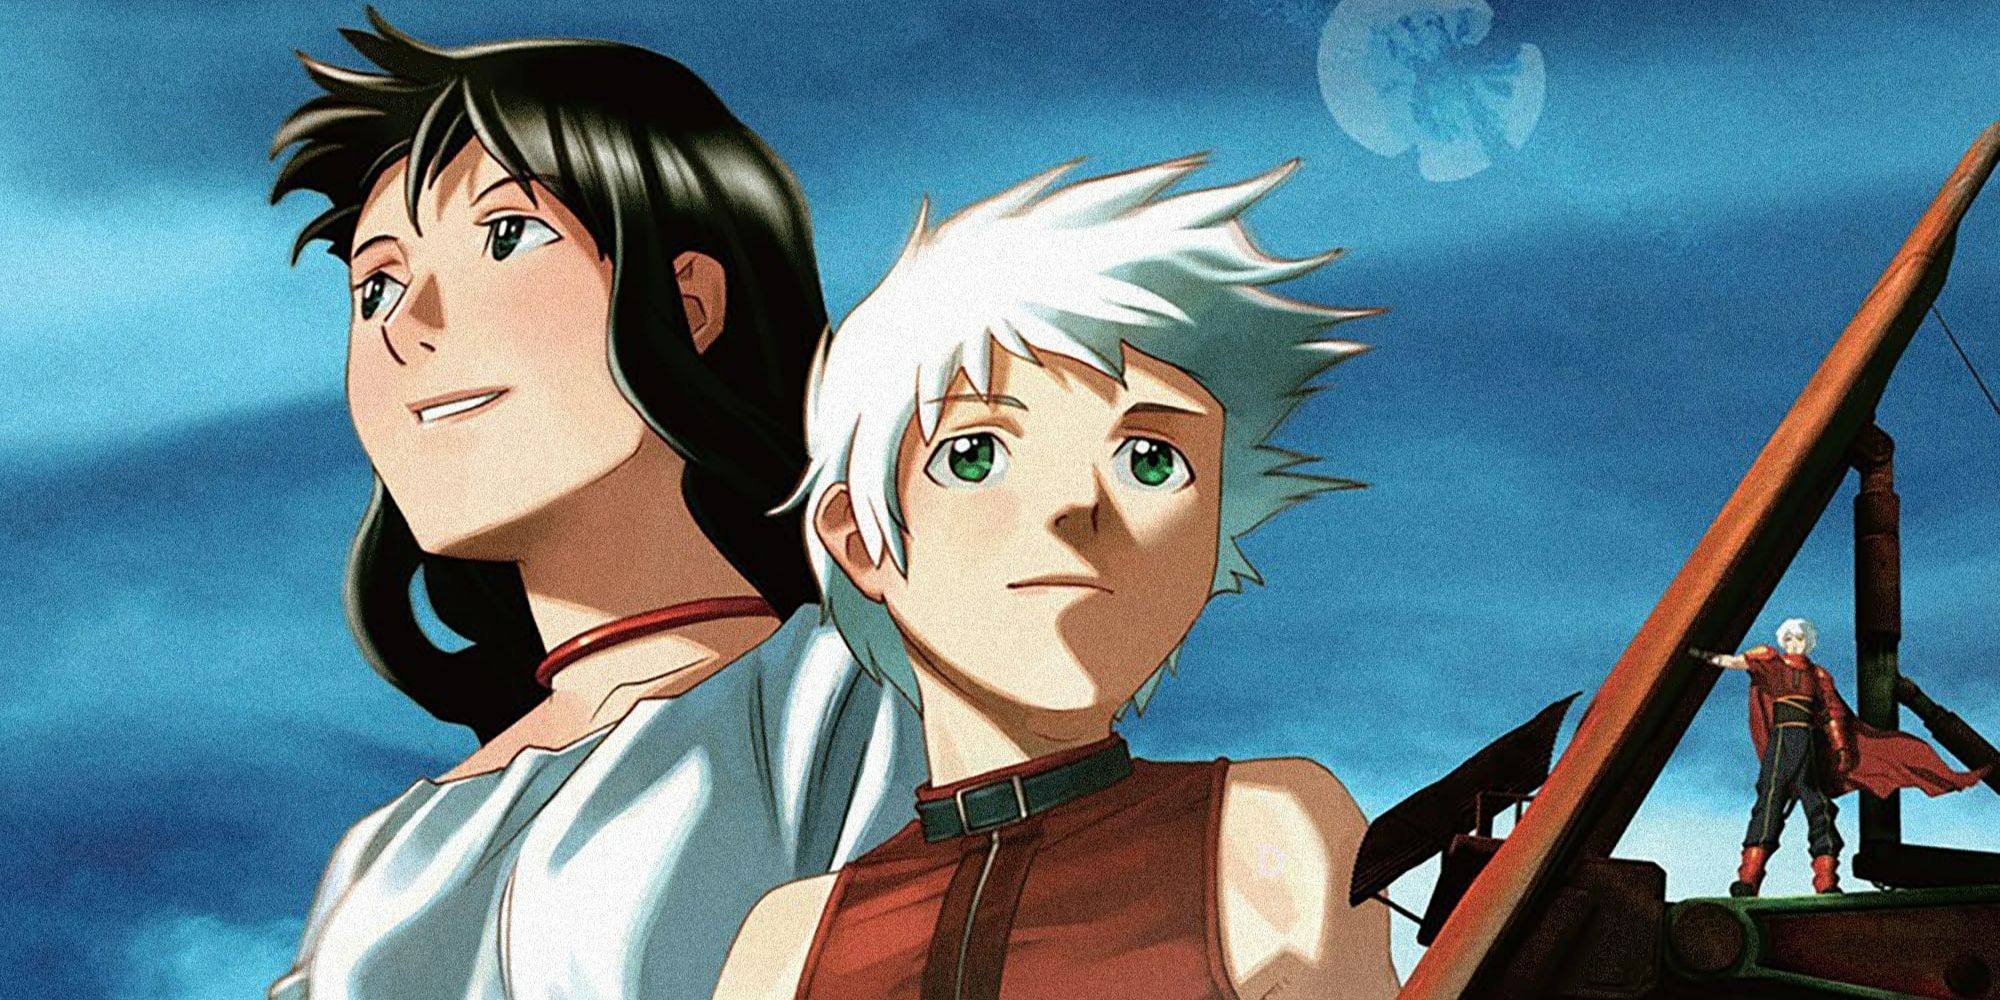 Close-up of two characters from Origin: Spirits Of The Past anime